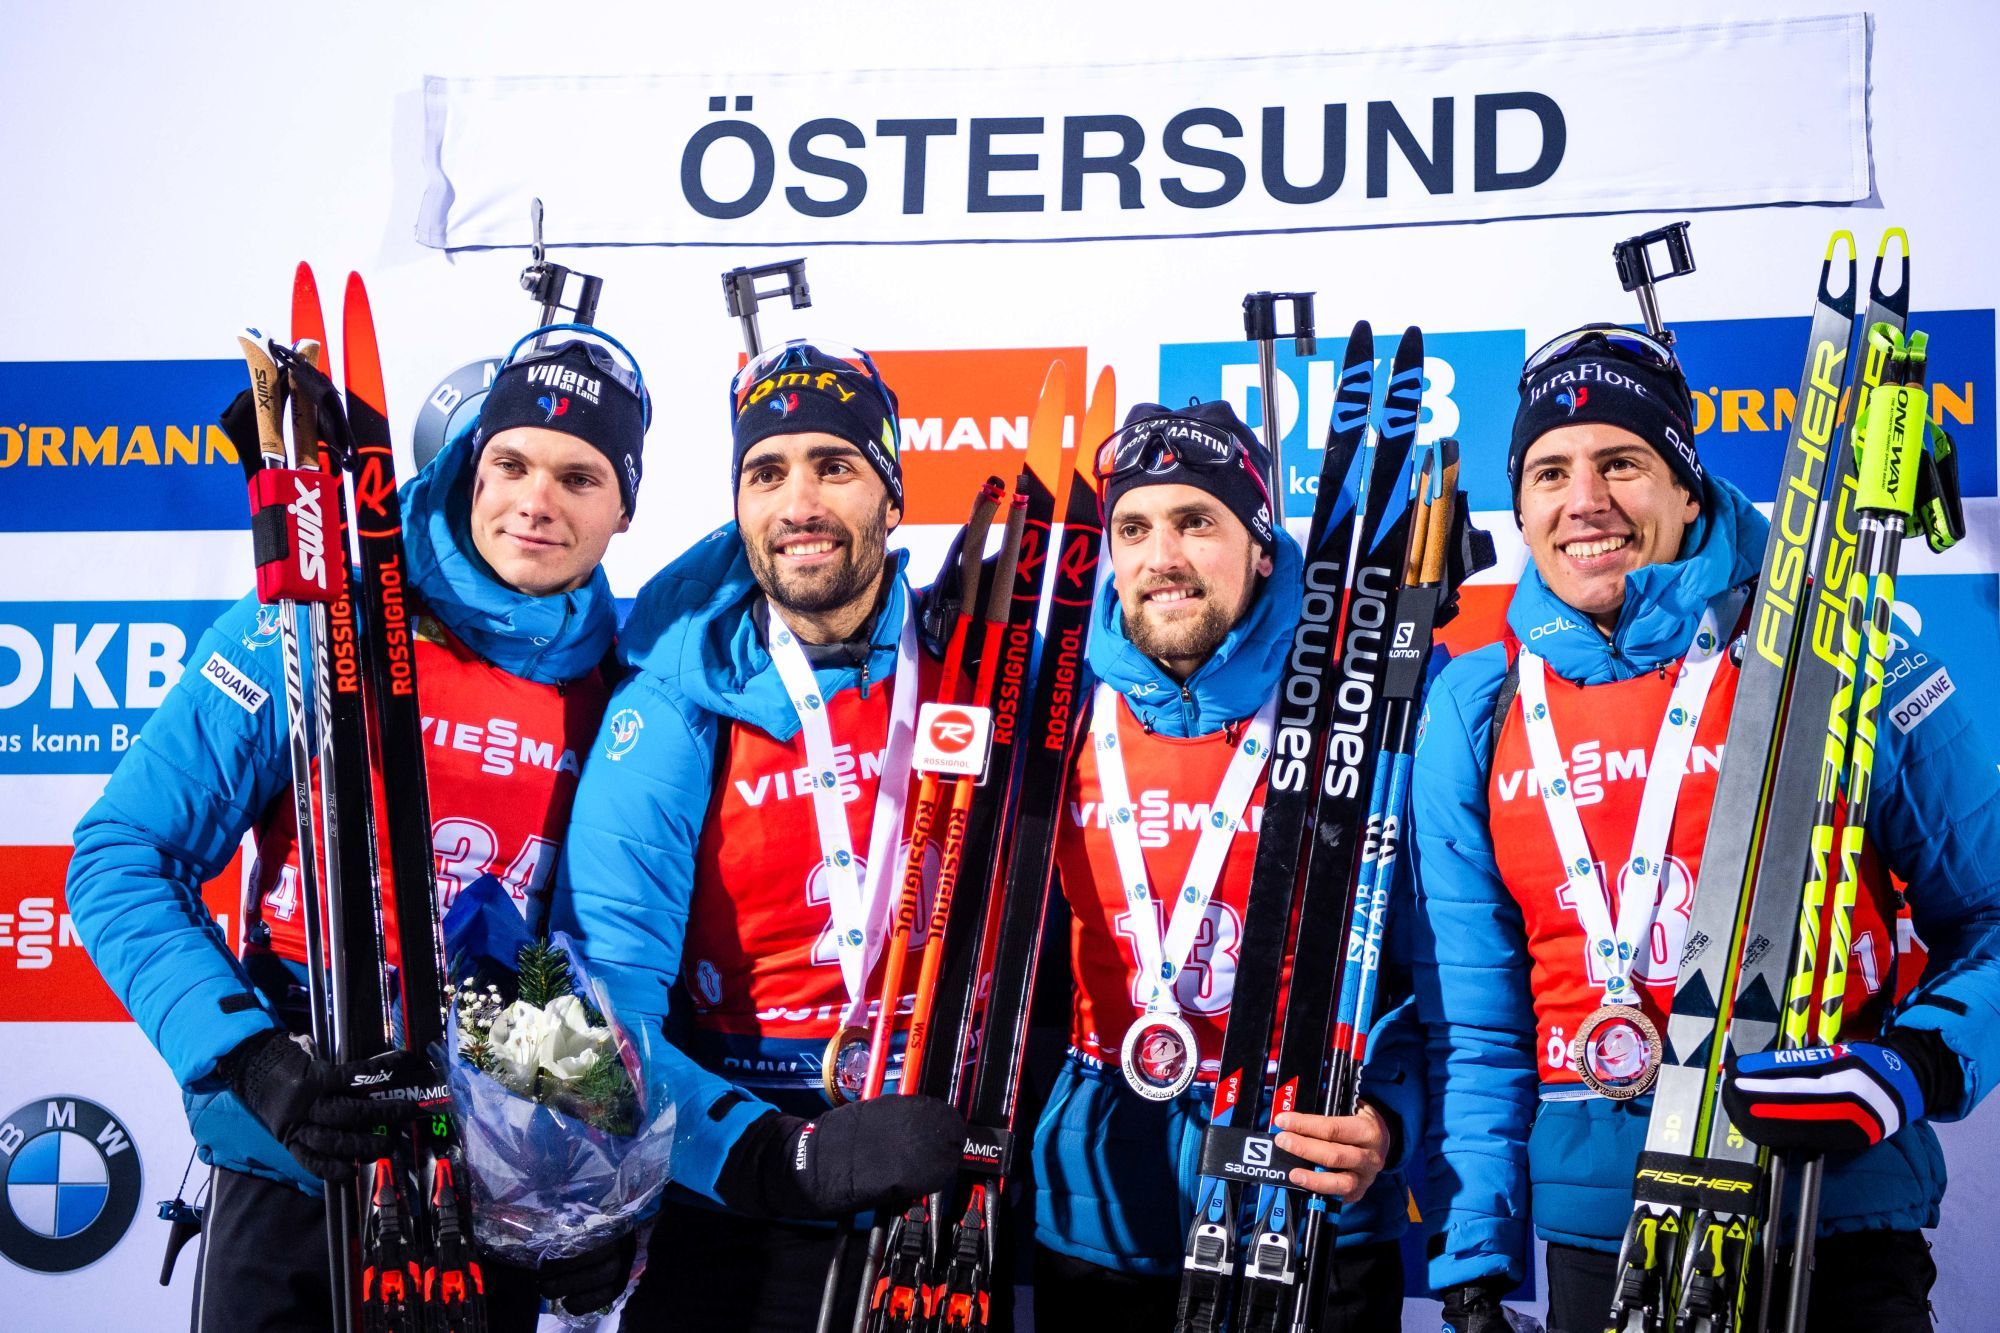 191204 Simon Desthieux, Martin Fourcade and Maillet Quentin Fillon and Emilien Jacquelin of France celebrate on the podium after the Men's 20 km Individual during the IBU World Cup Biathlon on December 04, 2019 in Östersund.
Photo: Johanna Lundberg / BILDBYRÅN / 136085 

Photo by Icon Sport - Martin FOURCADE - Quentin Fillon MAILLET - Simon DESTHIEUX - Emilien JACQUELIN - Ostersund (Suede)